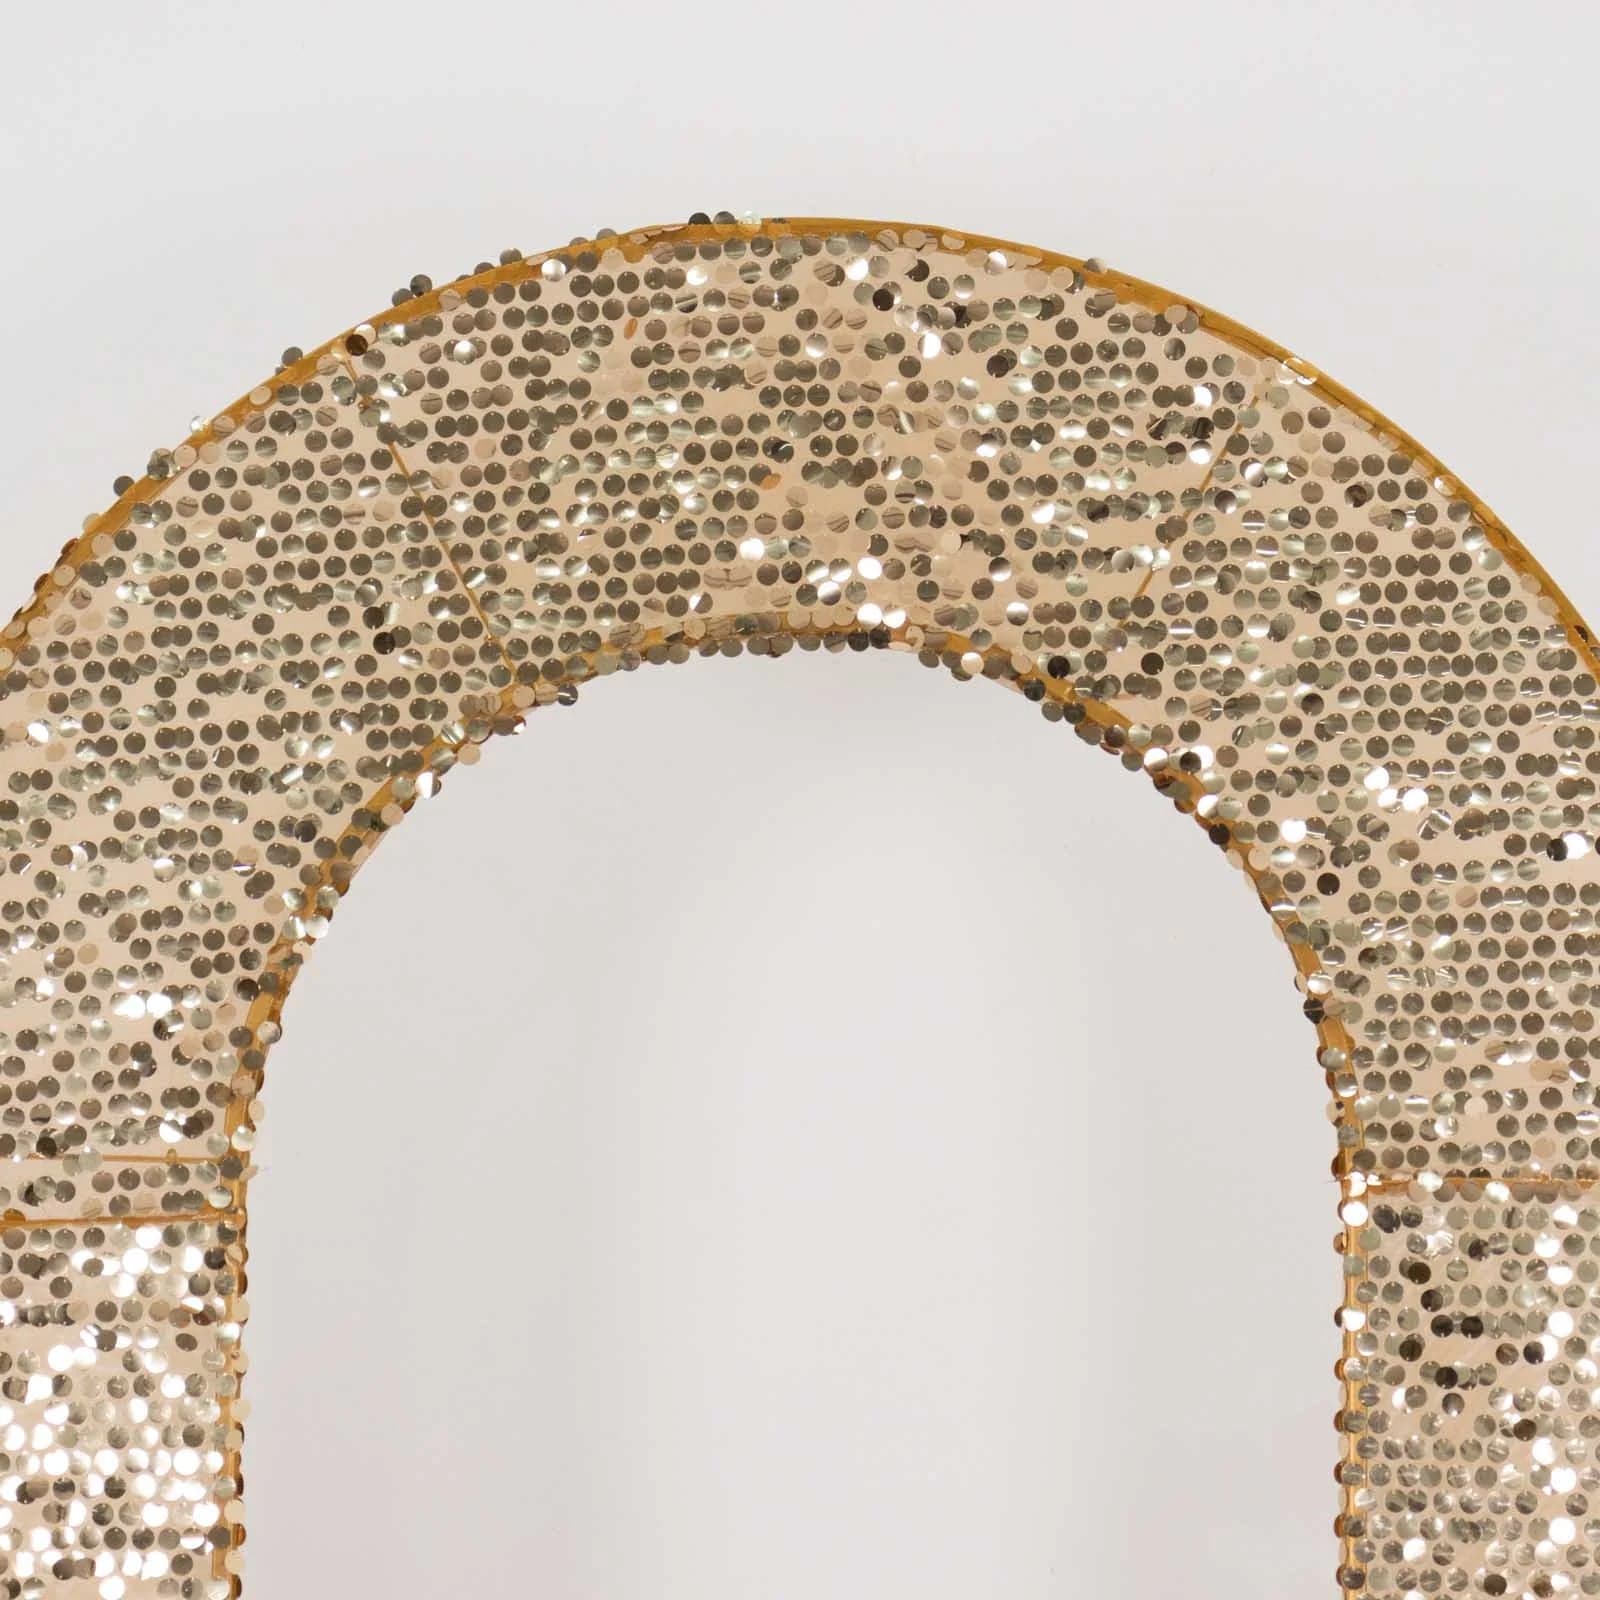 8 feet Big Payette Sequin Open Arch Backdrop Cover